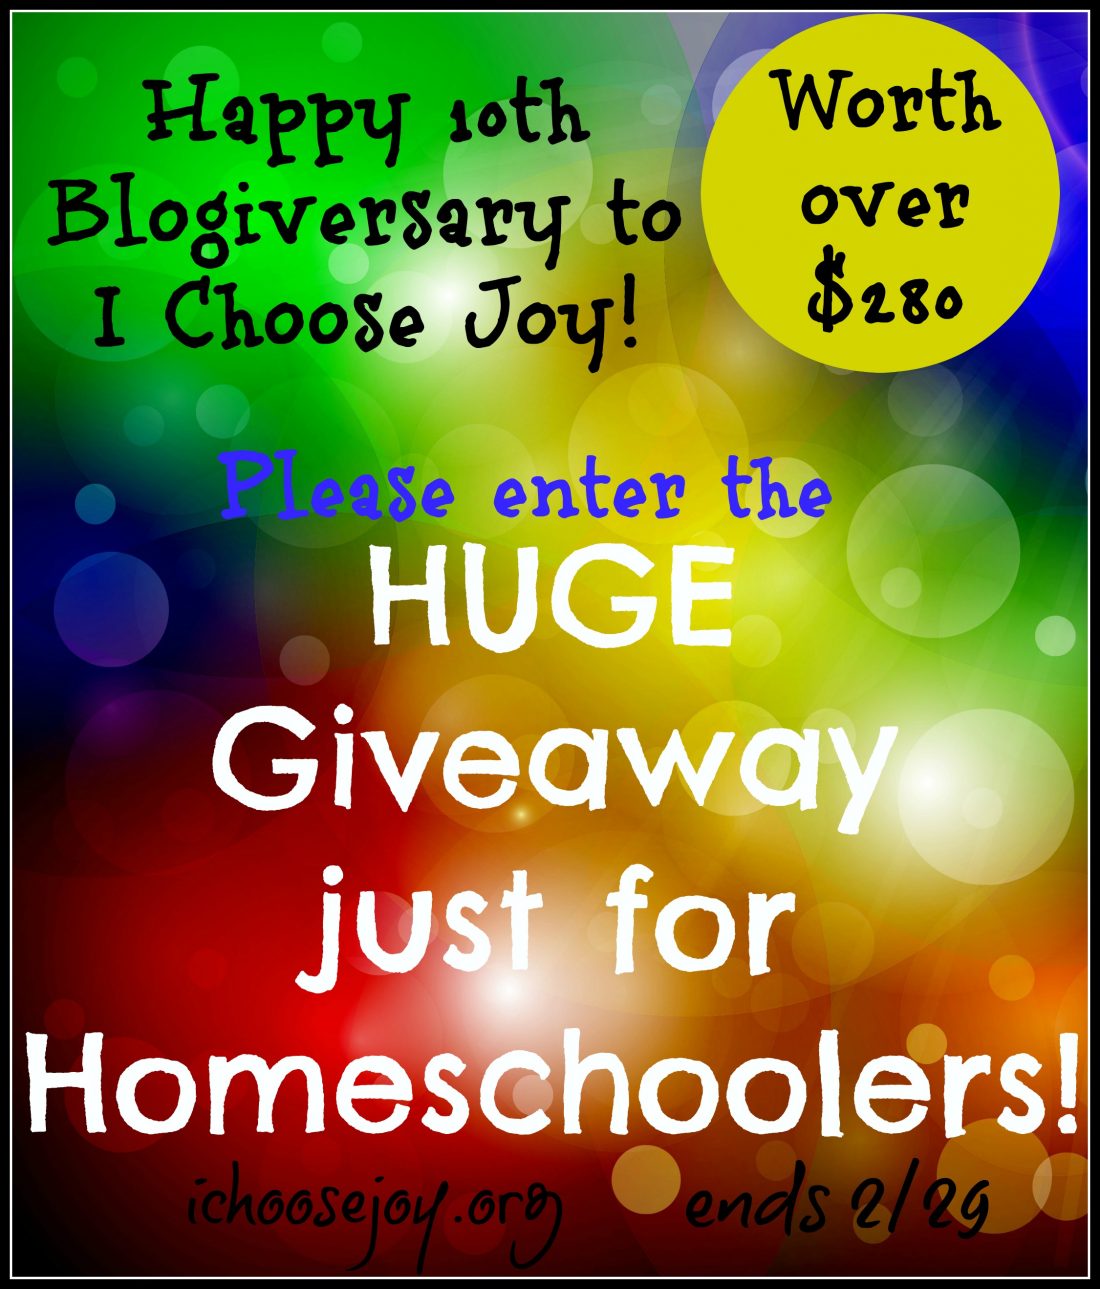 The “I Choose Joy!” 10-Year Blogiversary Giveaway–just for Homeschoolers!